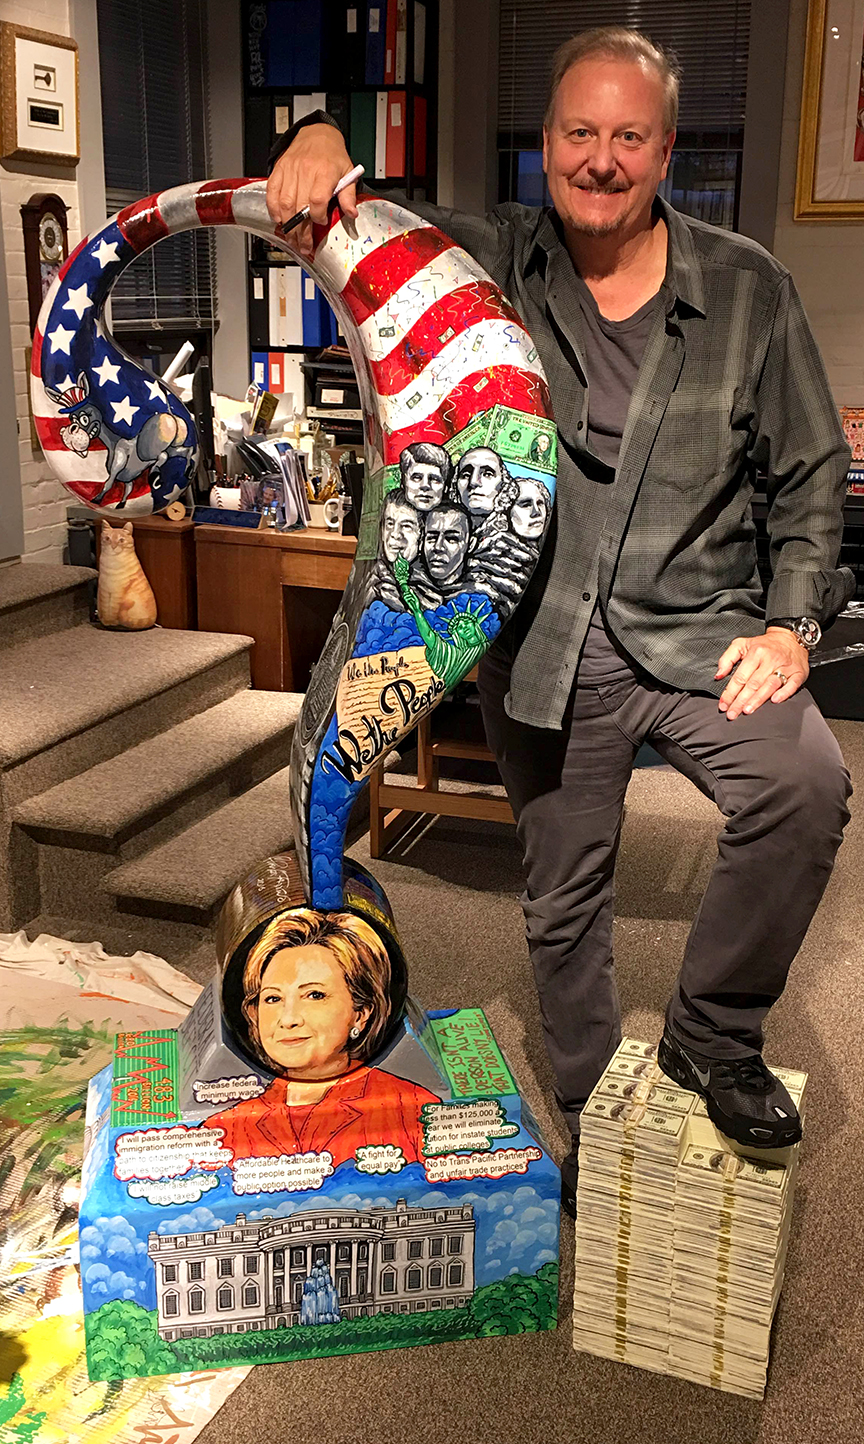 Charles Fazzino standing next to his Hilary Clinton question mark sculpture dedicated to the 2016 presidential debate 